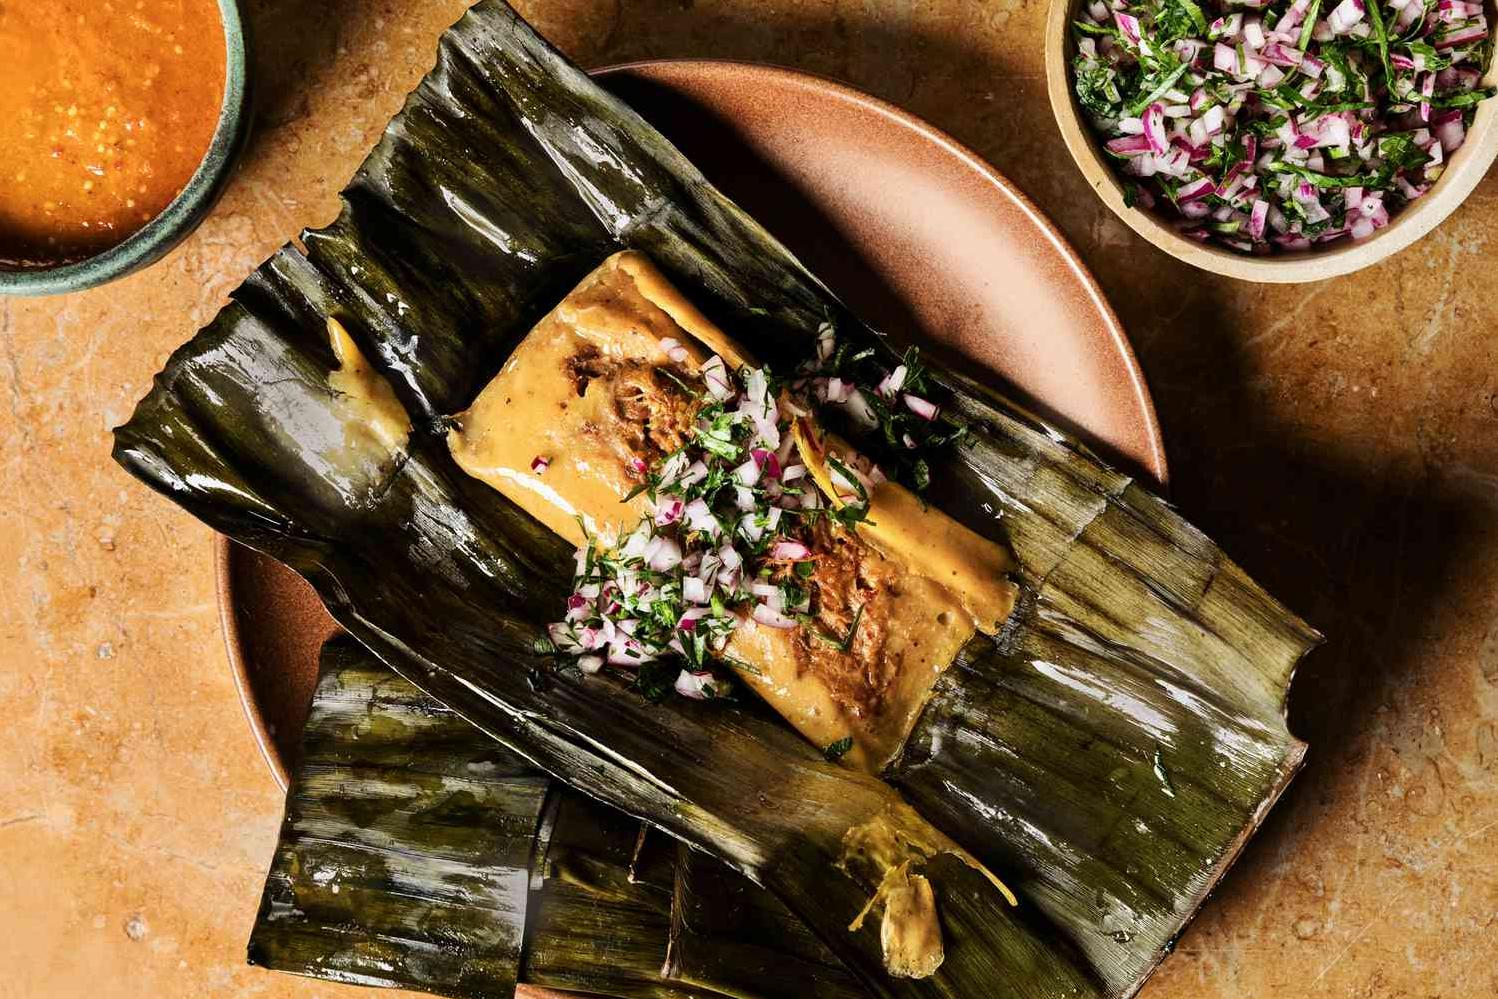  Tender, mouth-watering tamales that will make your taste buds dance.